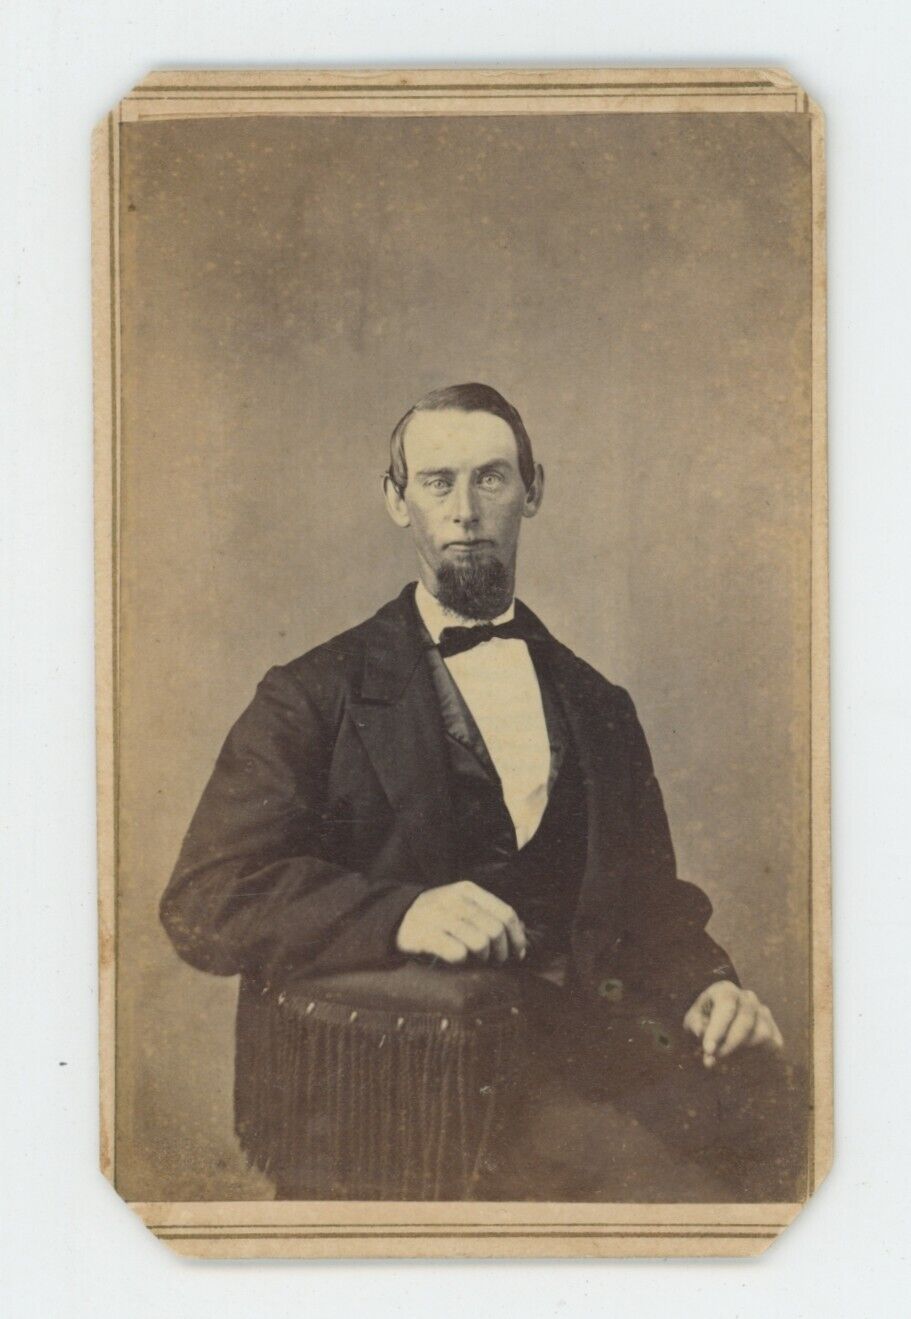 Antique CDV Circa 1860s Handsome Striking Man With Chin Beard Wearing Suit & Tie